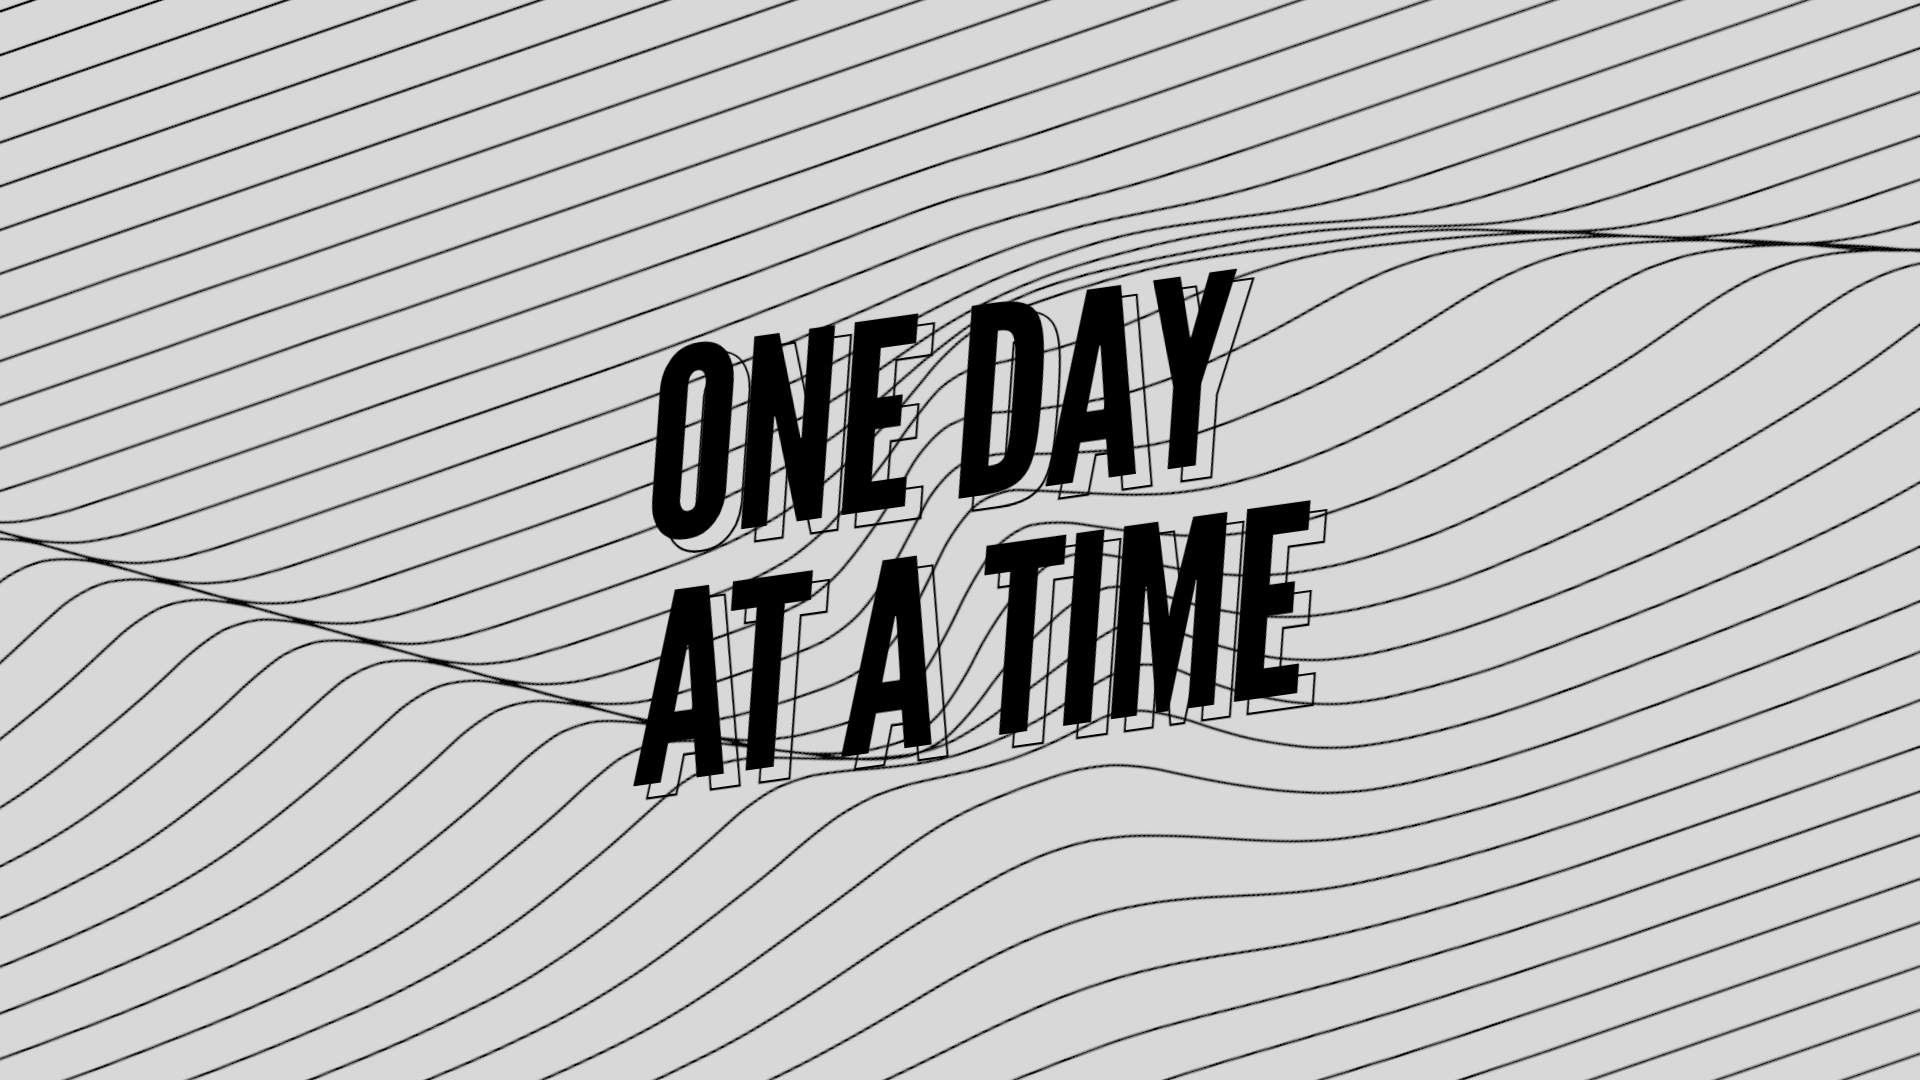 One Day at a Time Pt. 5